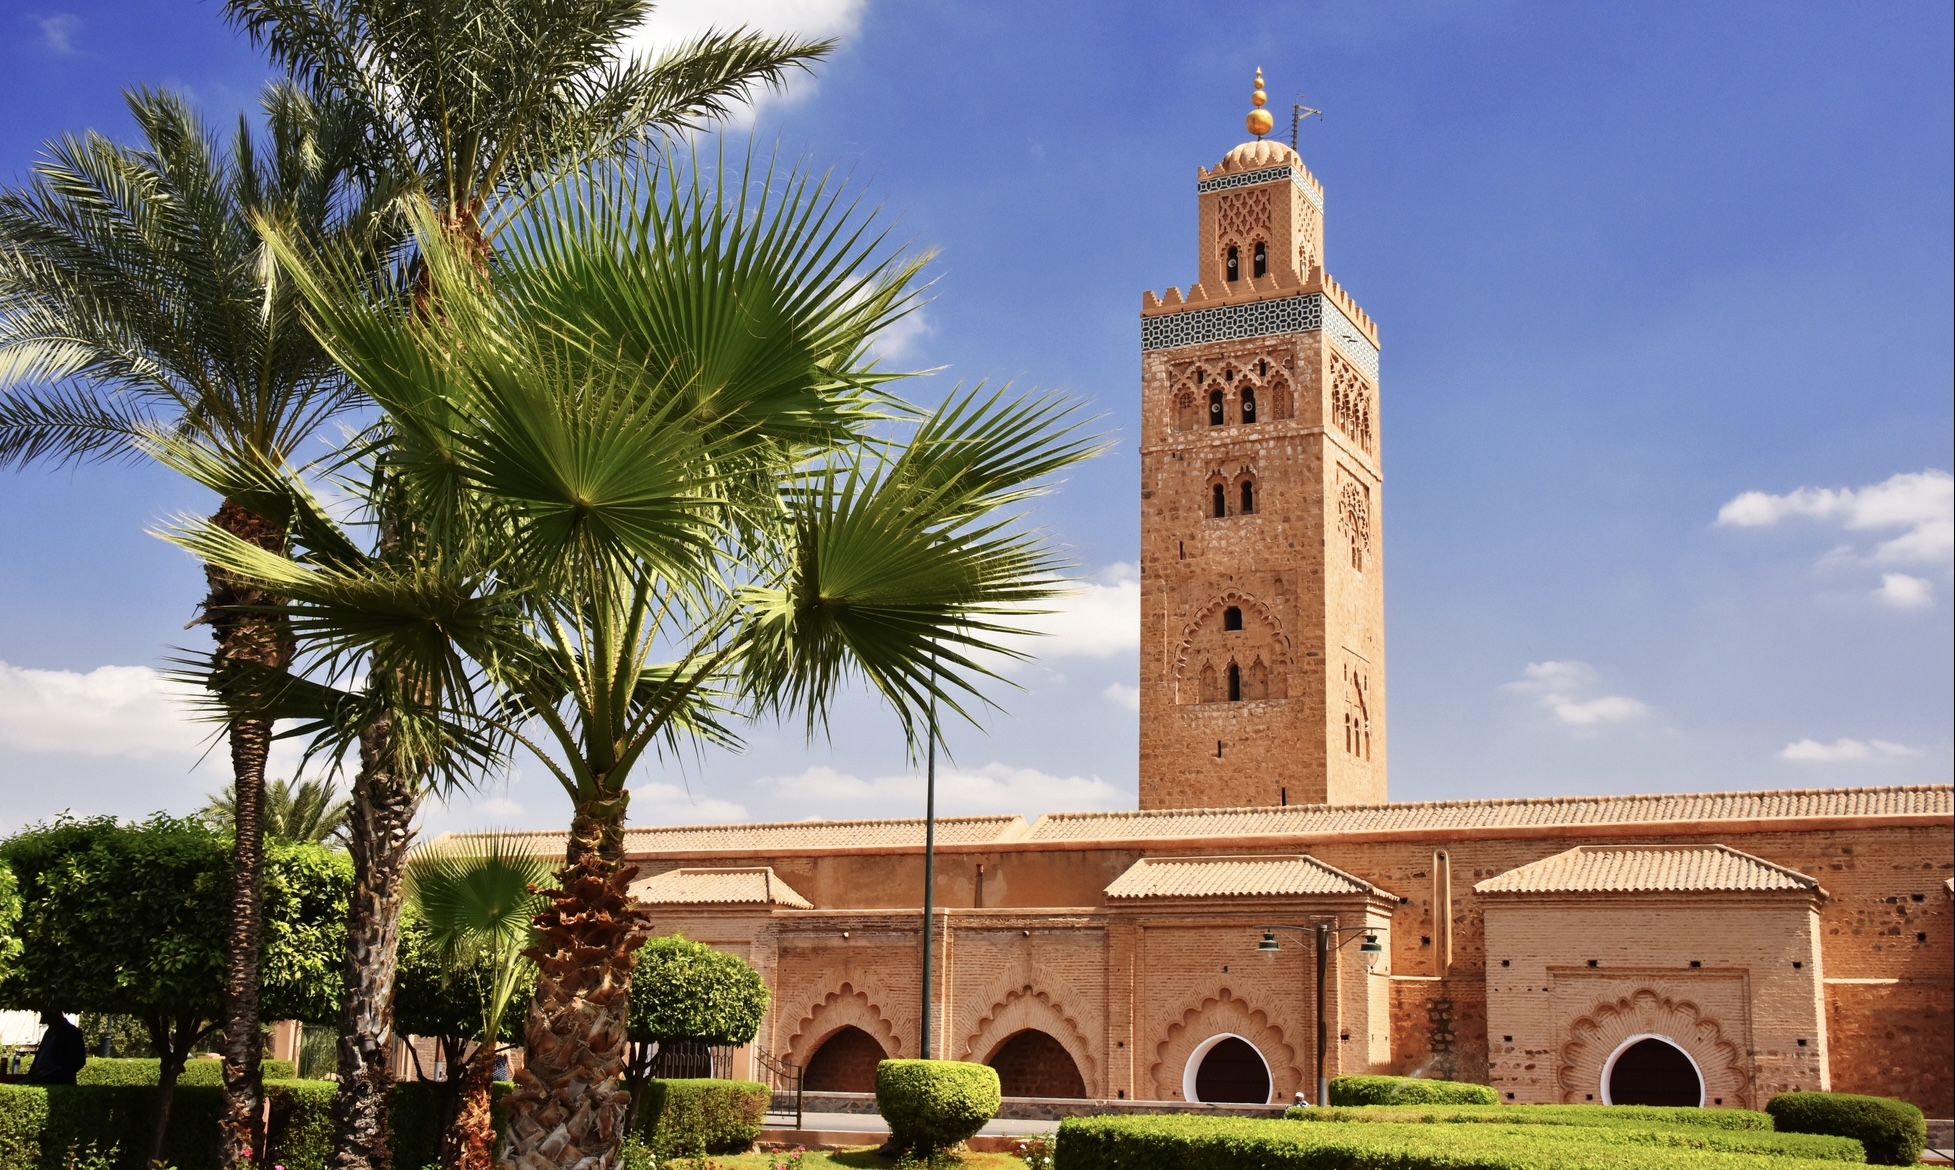 Air Transat is launching nonstop flights from Montreal to Marrakech this summer